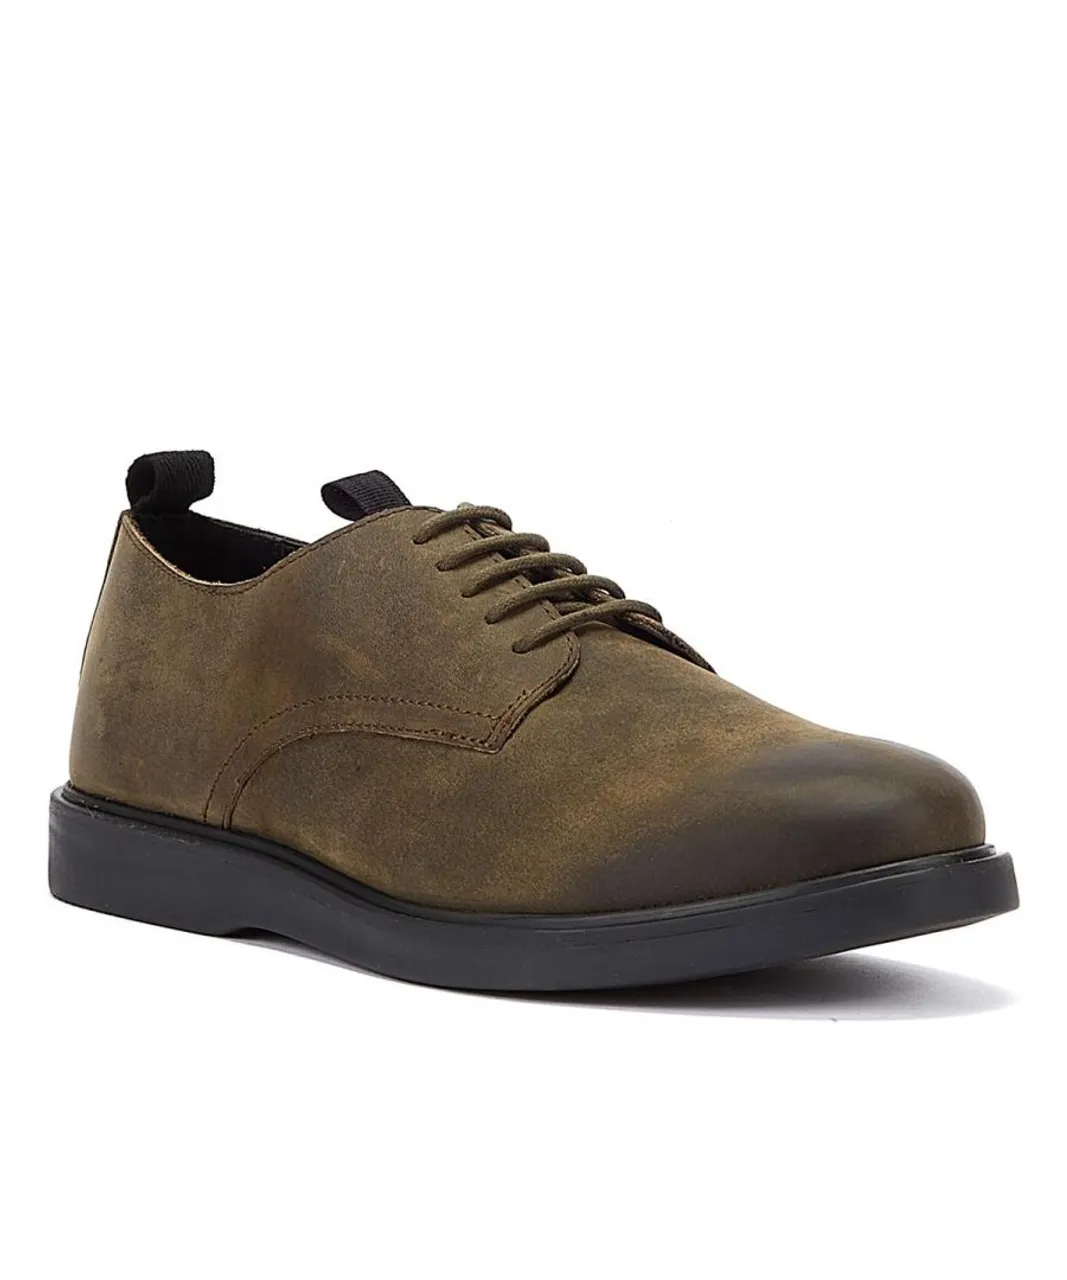 Hudson Barnstable Khaki Leather Mens Lace-Up Shoes - Green